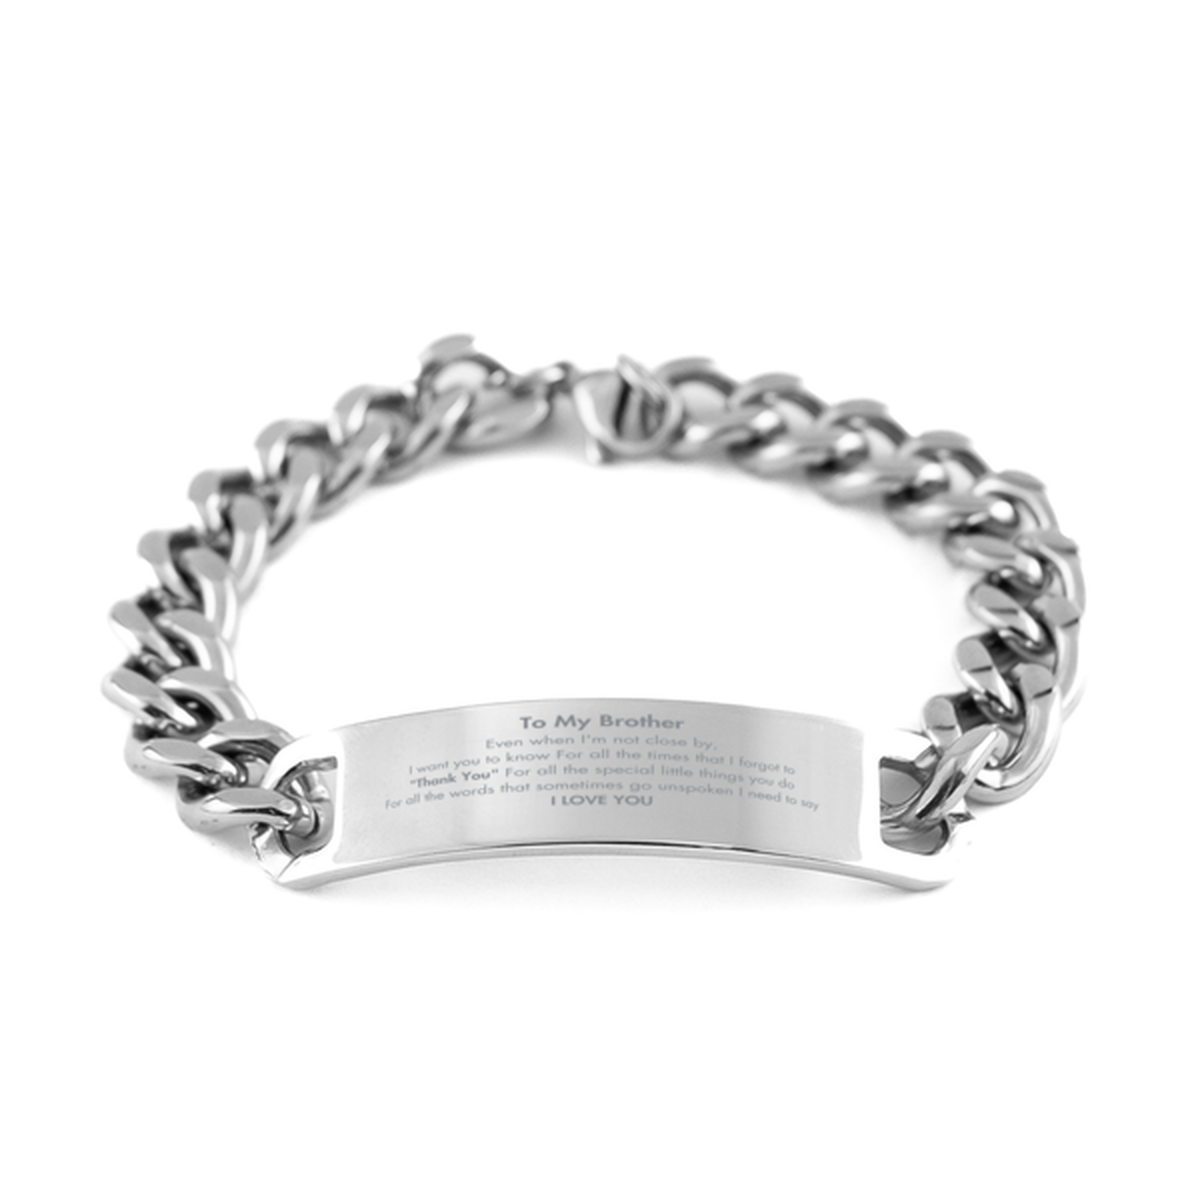 Thank You Gifts for Brother, Keepsake Cuban Chain Stainless Steel Bracelet Gifts for Brother Birthday Mother's day Father's Day Brother For all the words That sometimes go unspoken I need to say I LOVE YOU